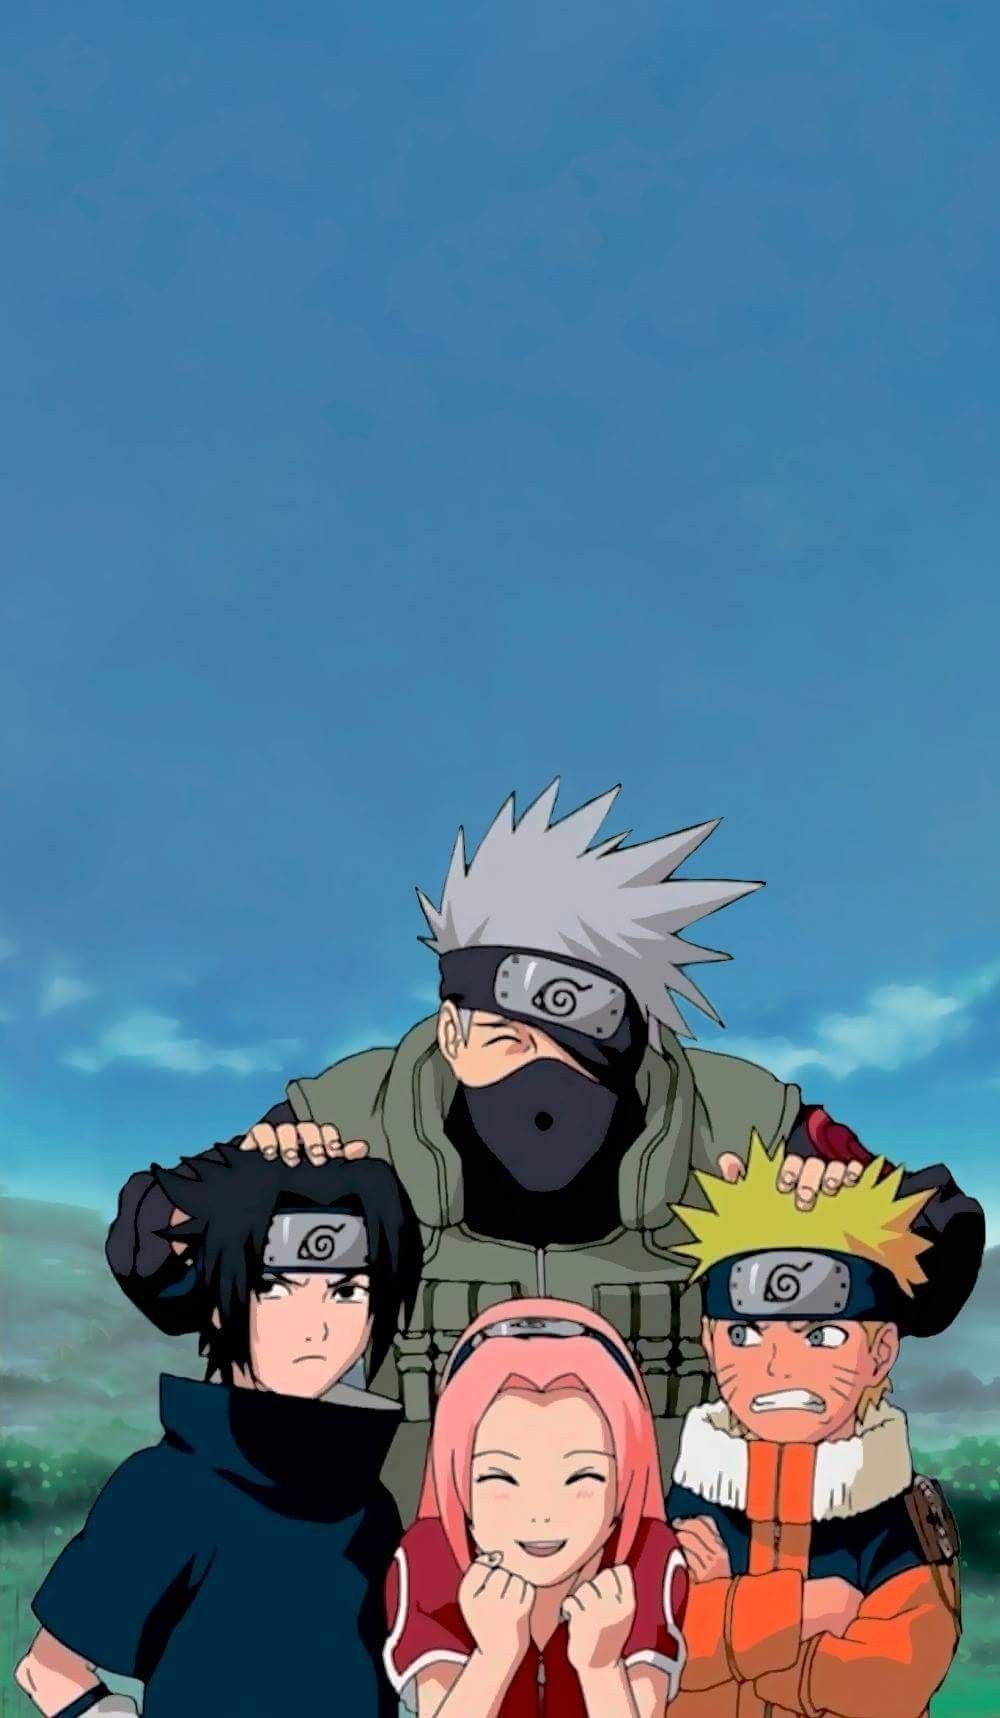 Buy OLMITA Anime Wall Mural 3D Naruto Photo Wallpaper Boys Kids Bedroom  Custom Cartoon Wallpaper Home Large Wall Art Room Decor,E Online at Low  Prices in India - Amazon.in